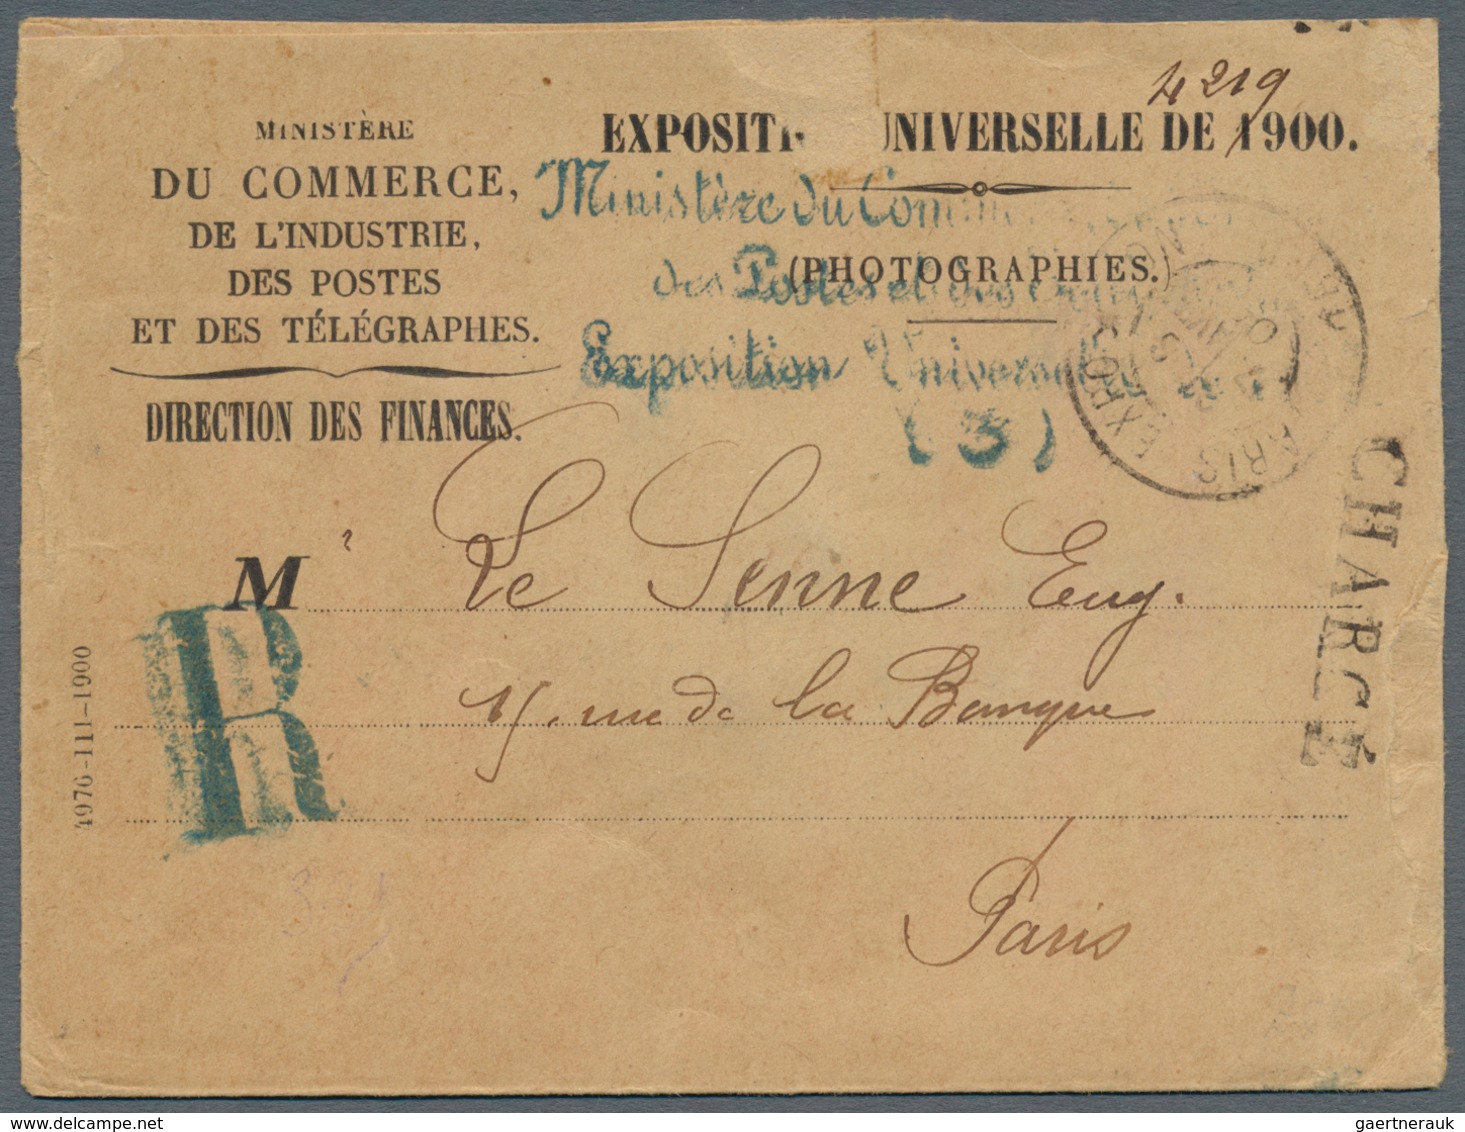 Frankreich: 1803/1925, group of 28 covers/cards from some interesting pre-philately, good range of p